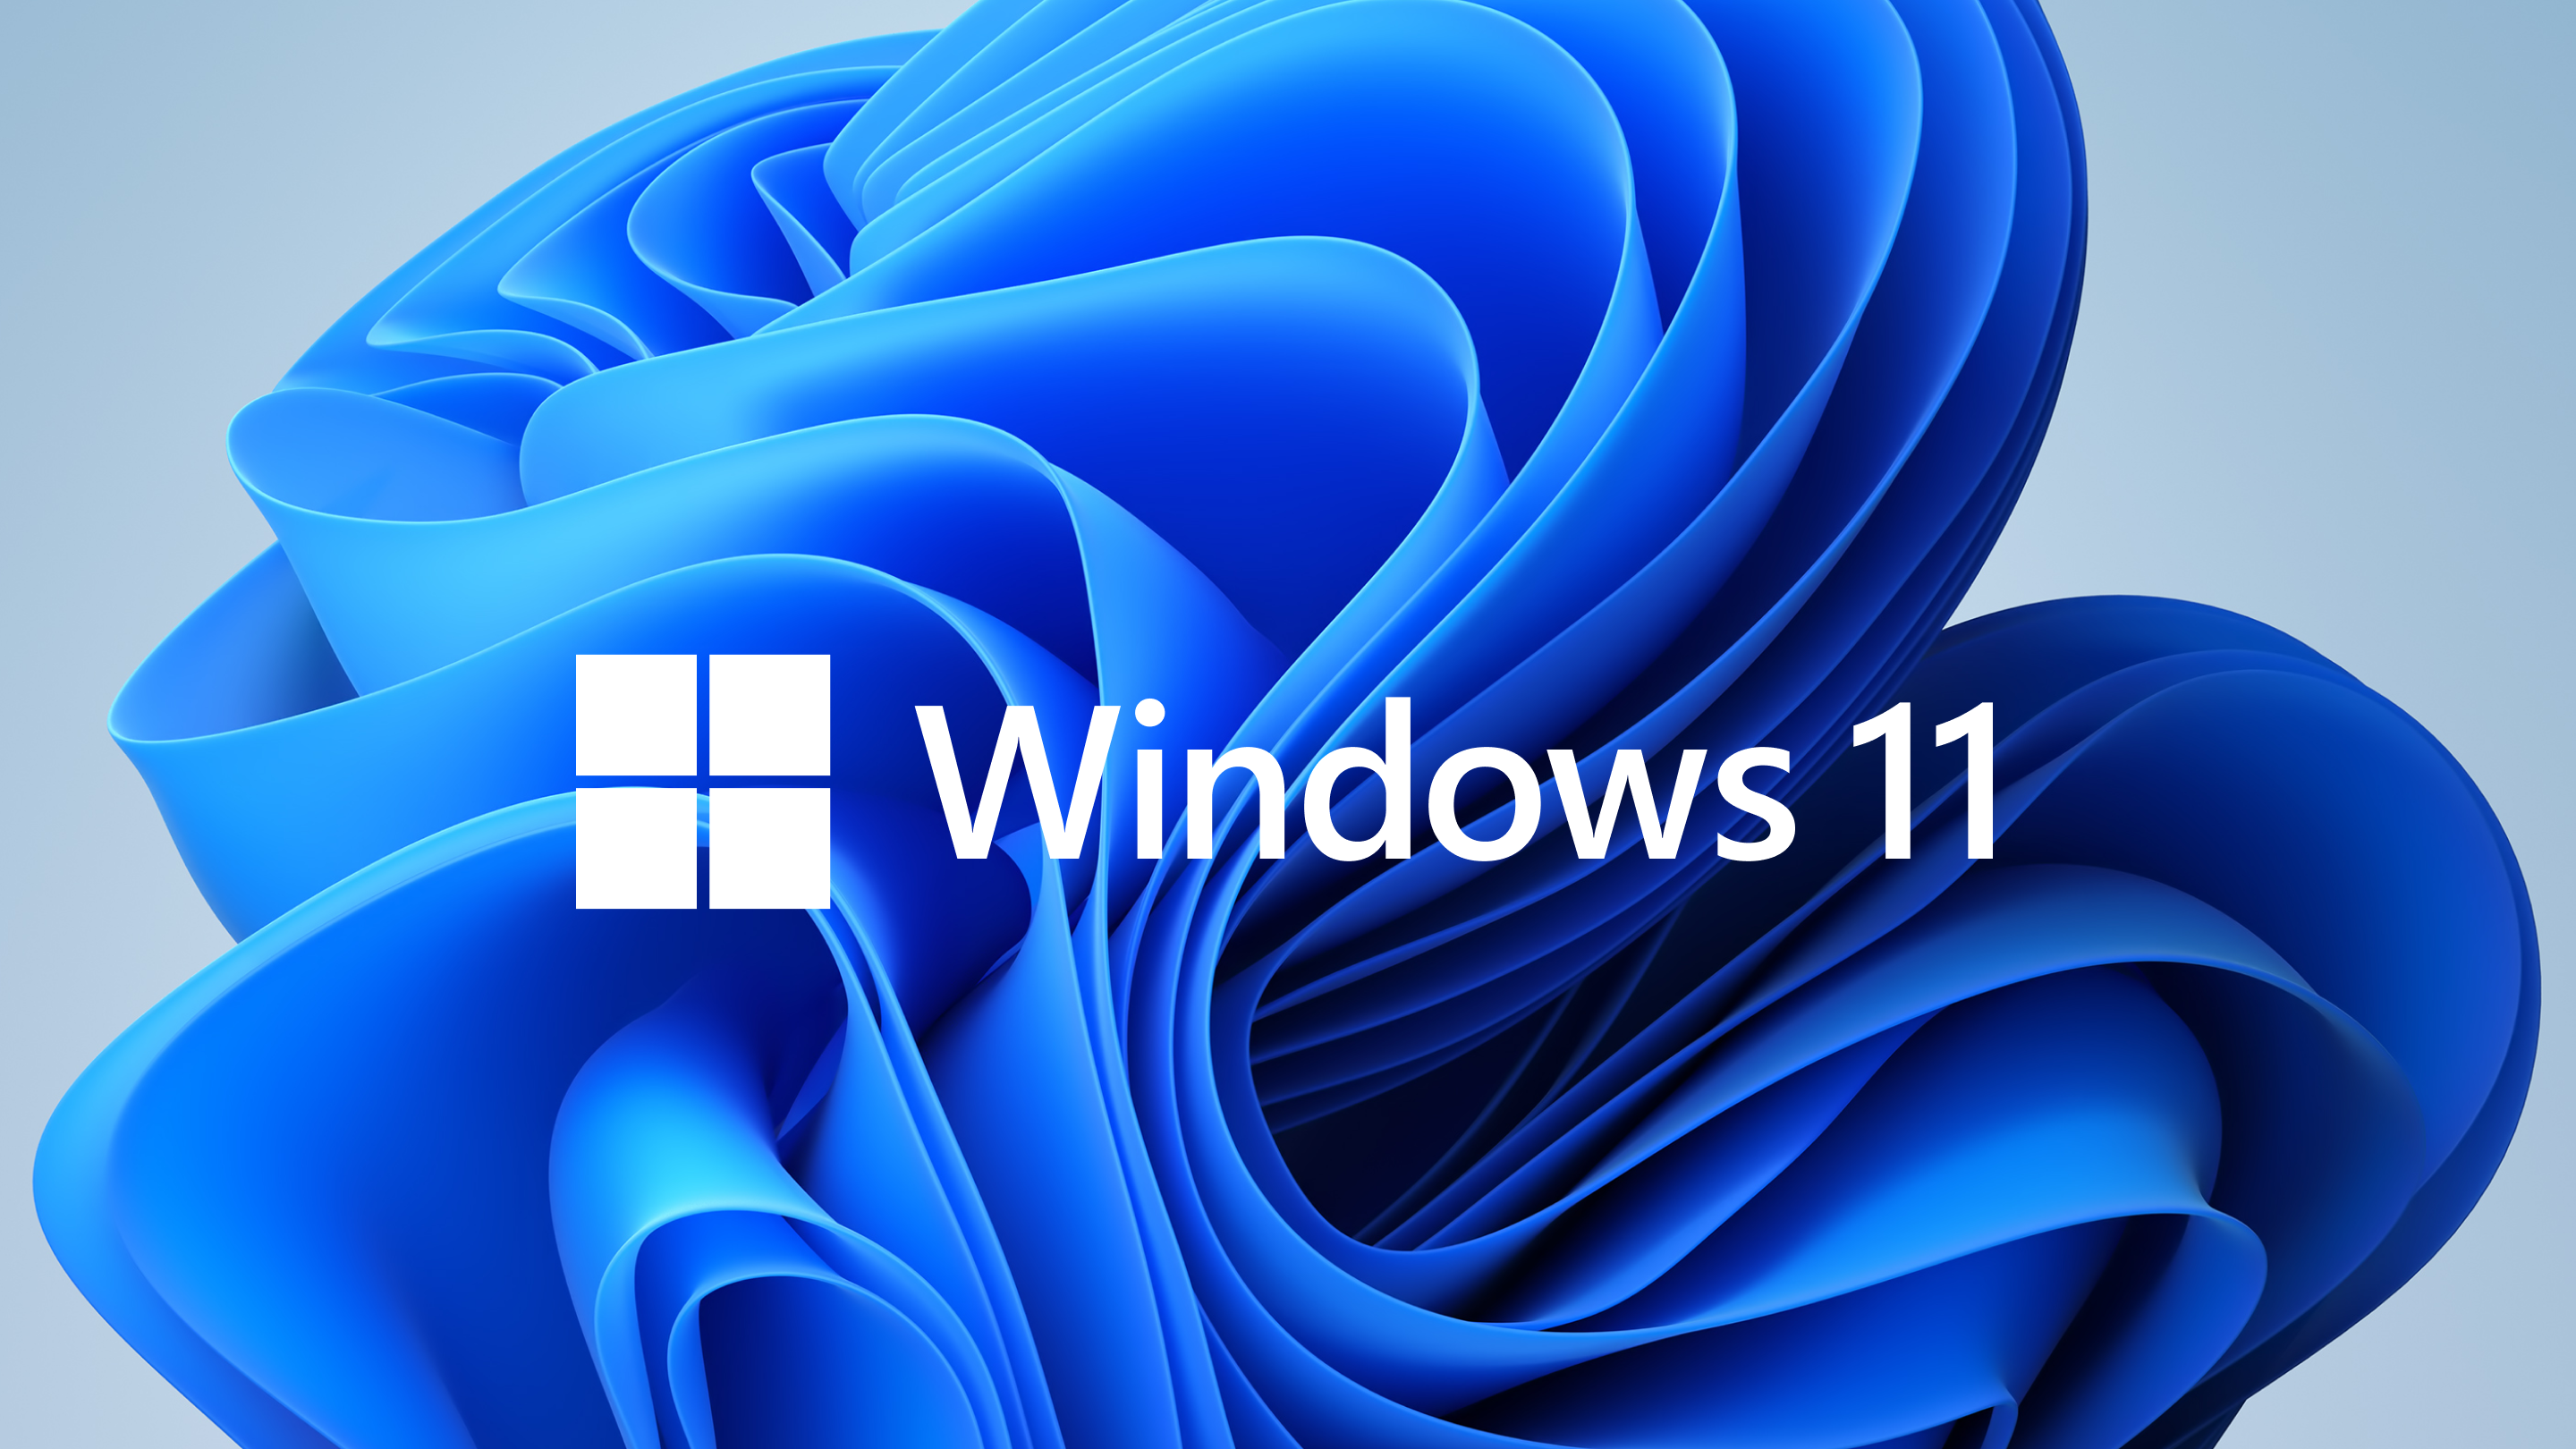 Windows 11 users discover controversial new design detail